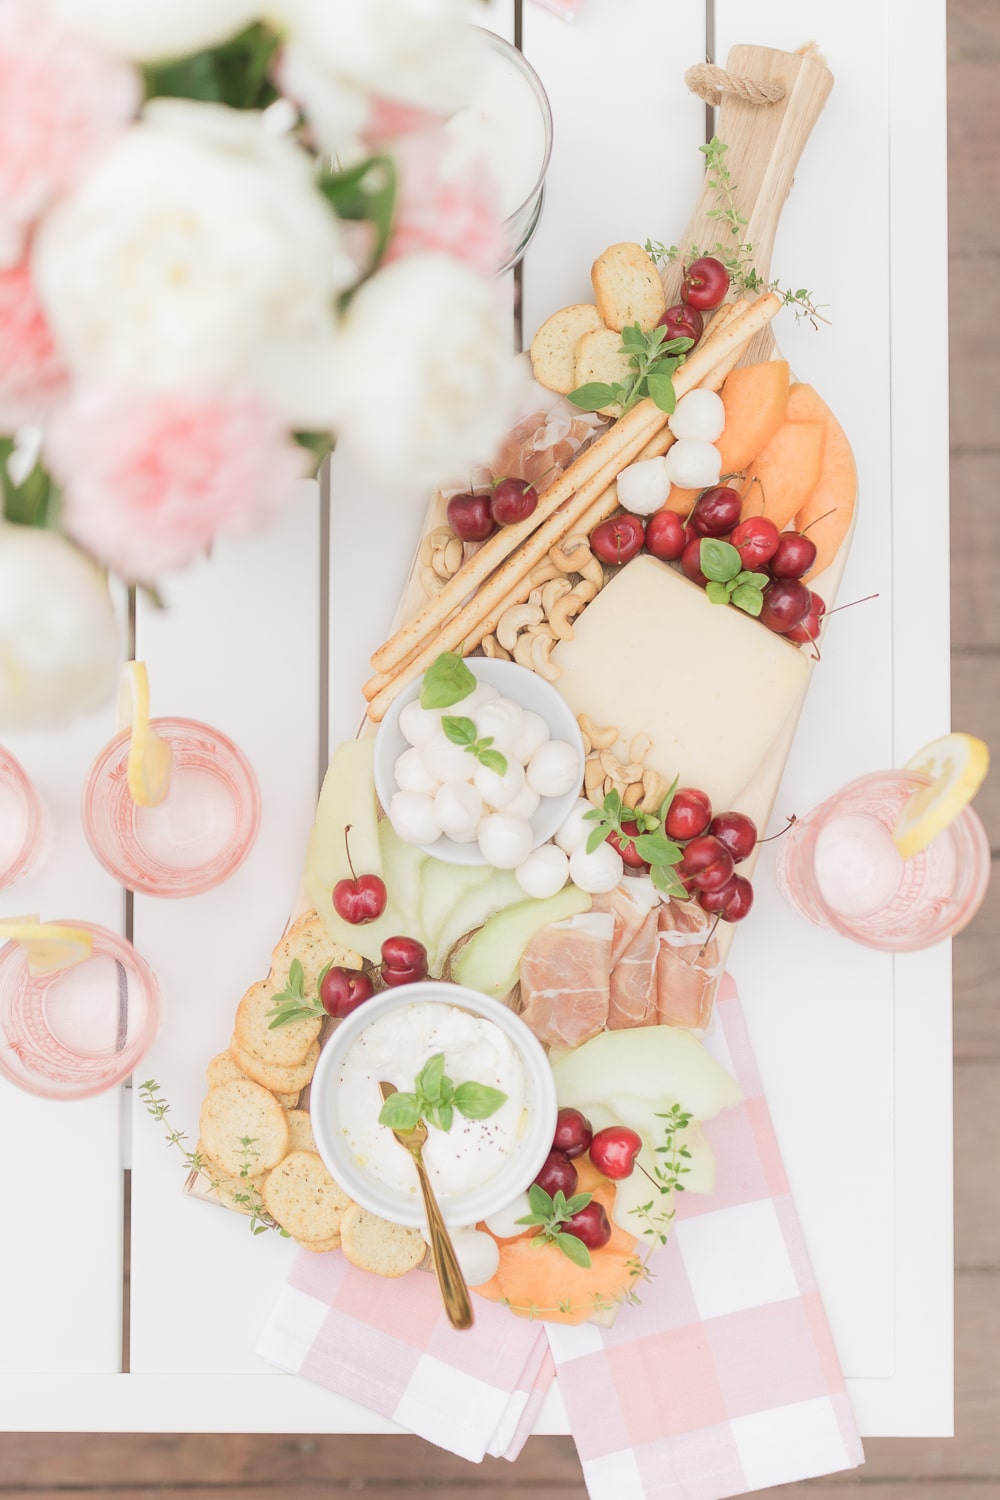 Colorful Italian cheese board created by blogger Stephanie Ziajka on Diary of a Debutante